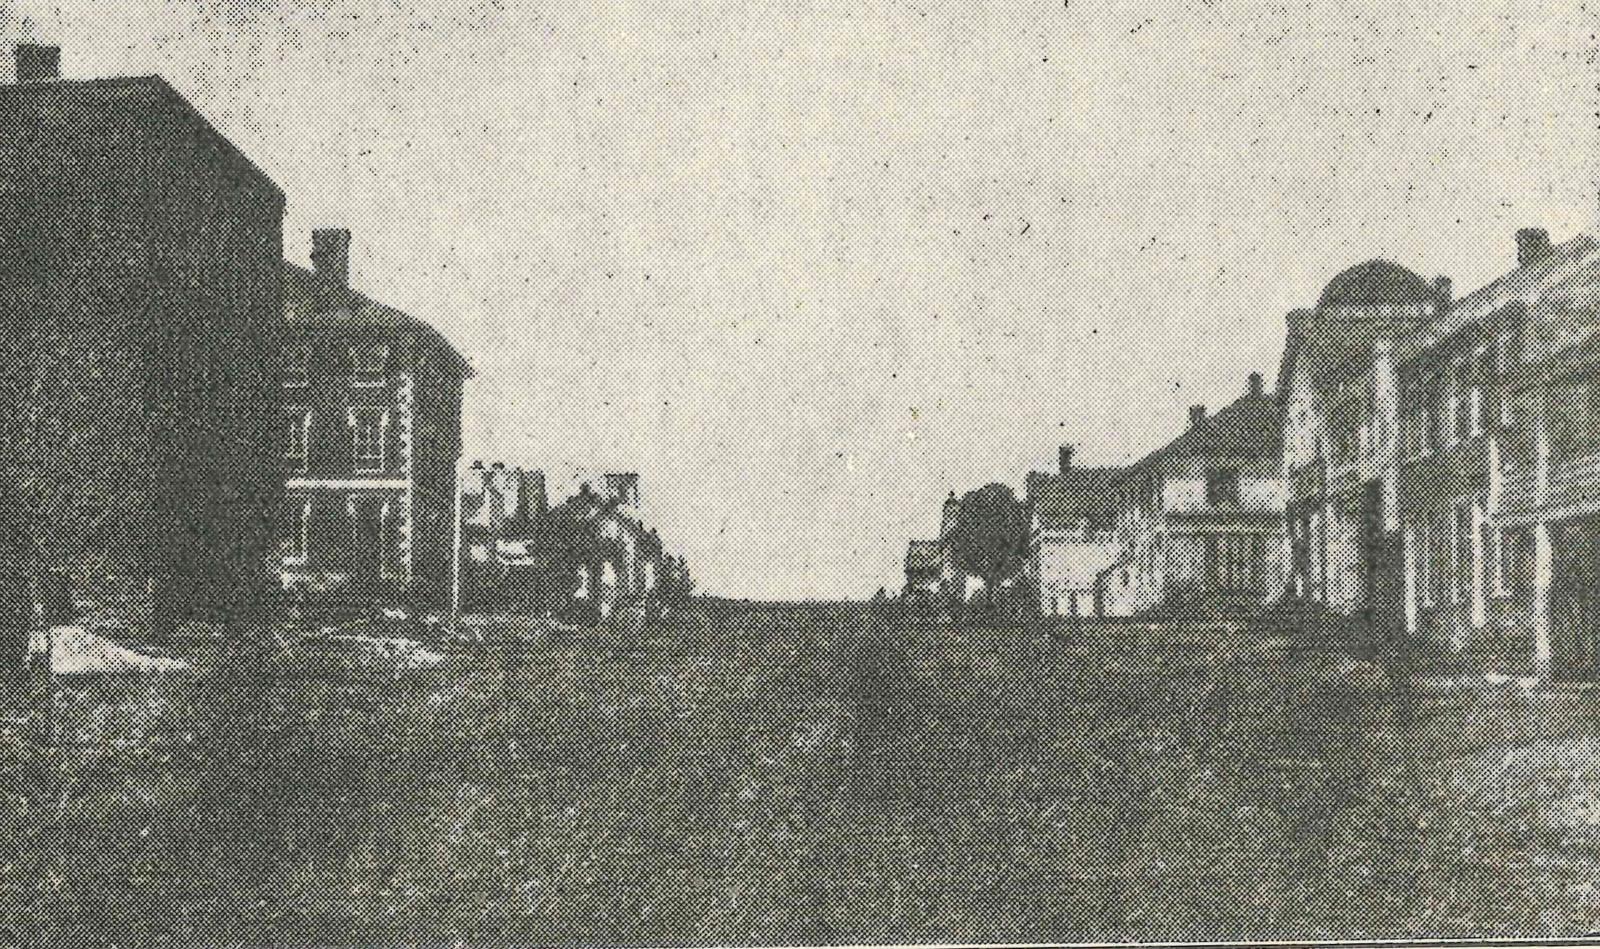 Beckwith Street, Smiths Falls, ca. 1860